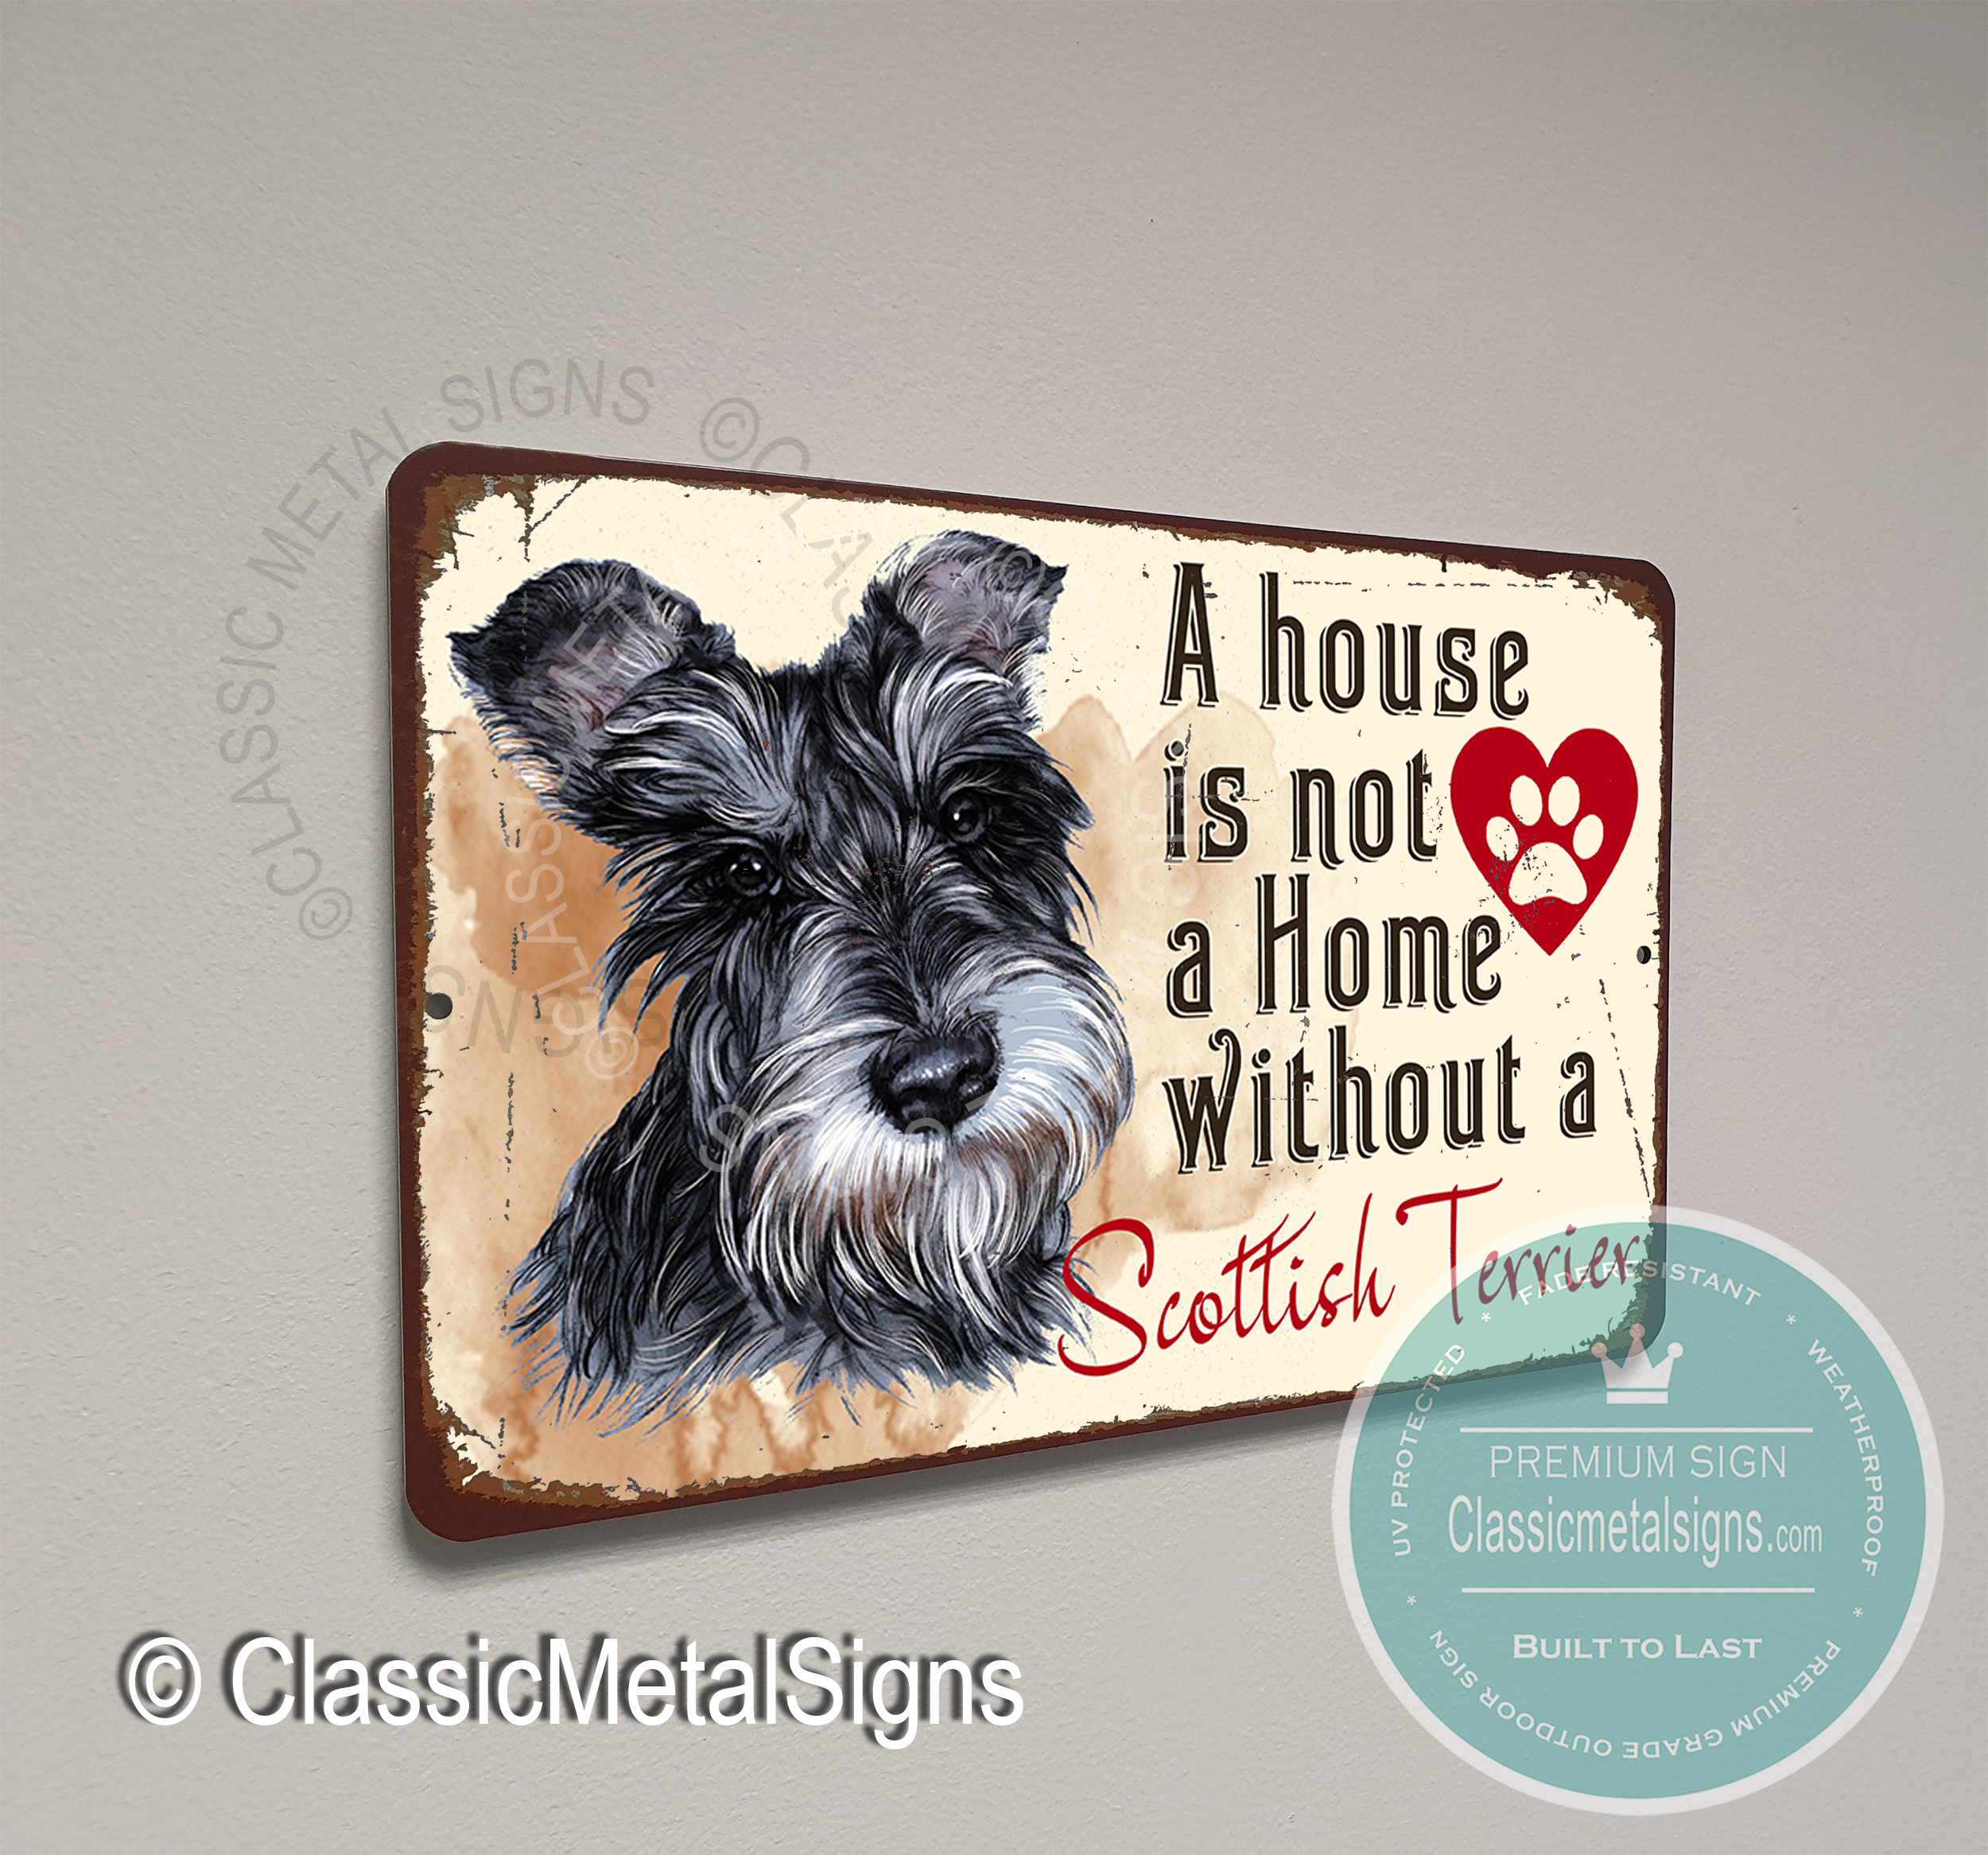 A House is not a home without a Scottish Terrier Signs